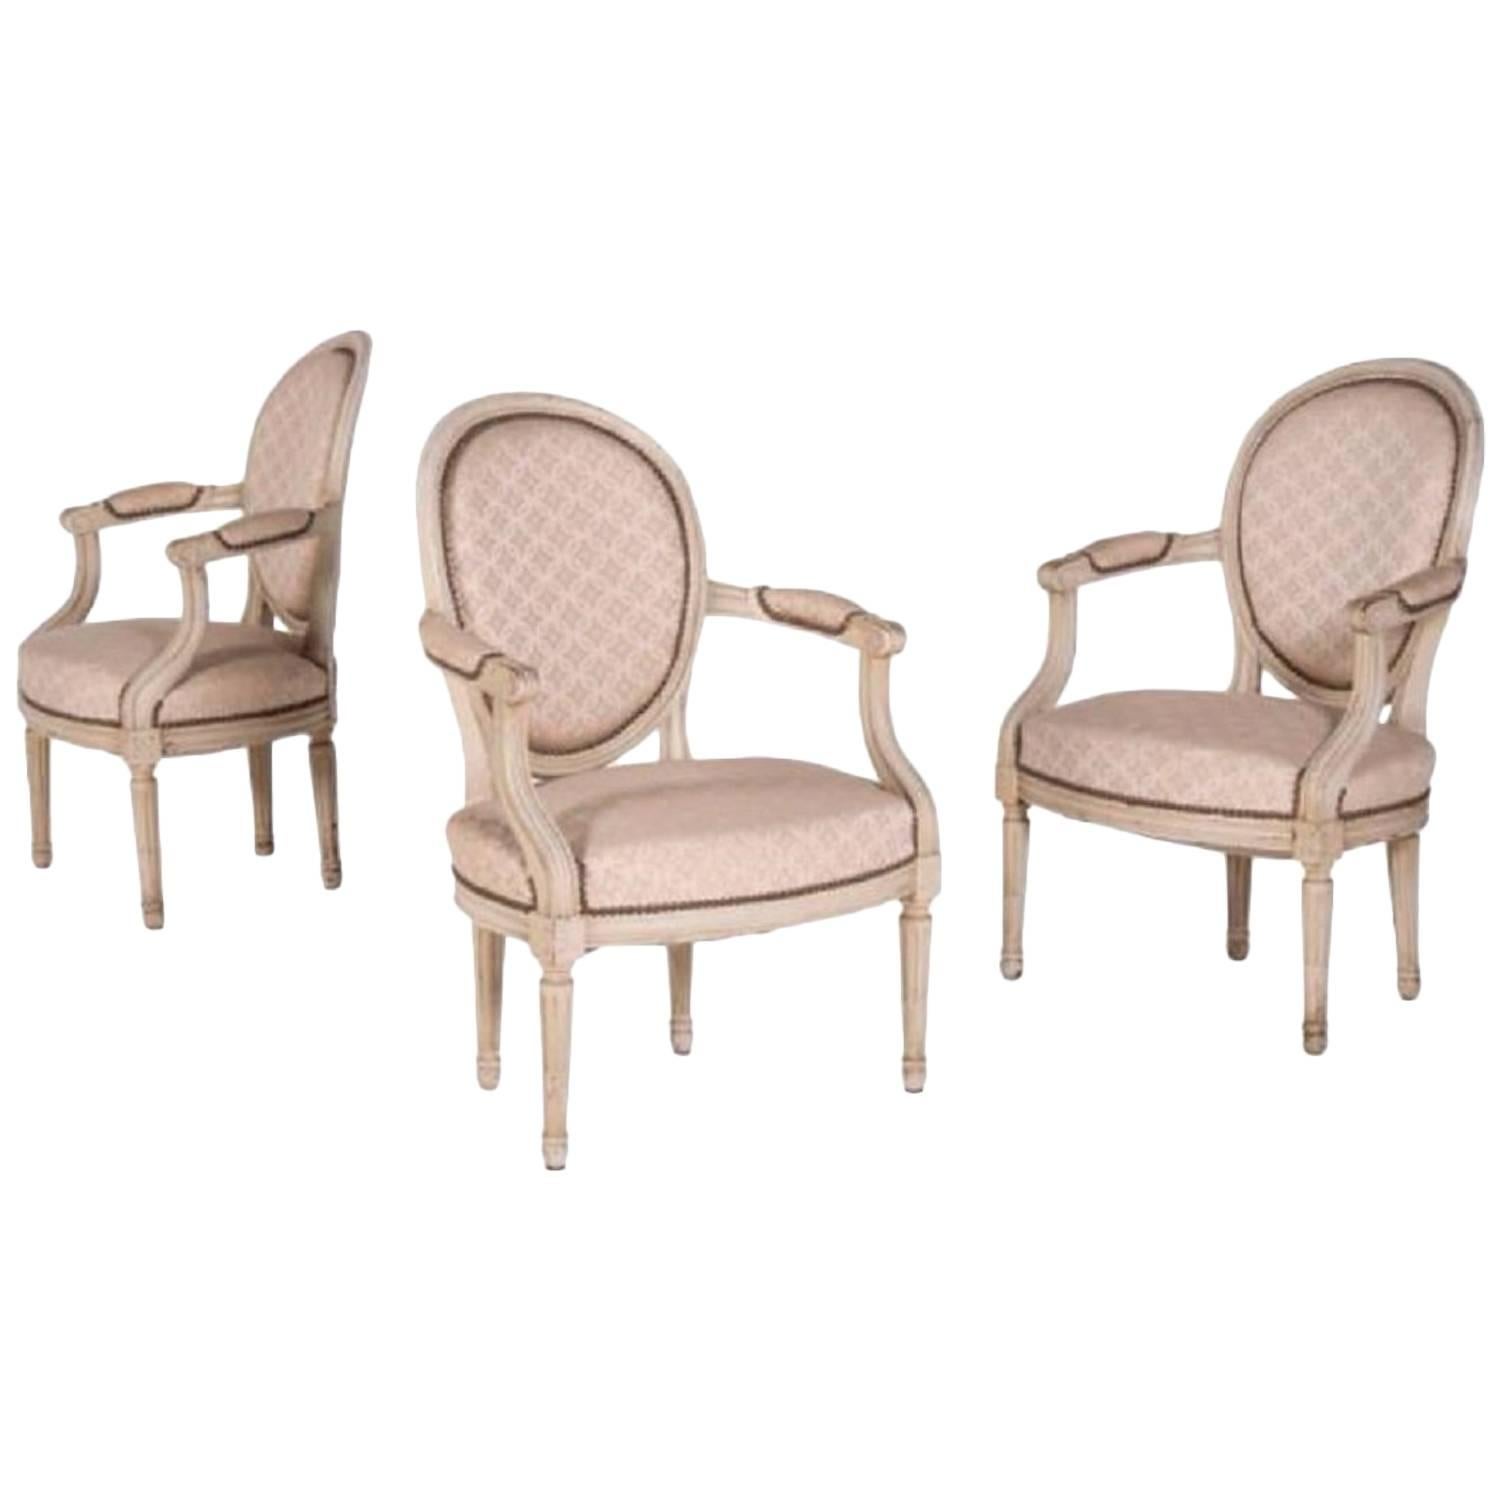 Three Elegant Antique "Cabriolet" Armchairs in Louis XVI Style, France, 1860